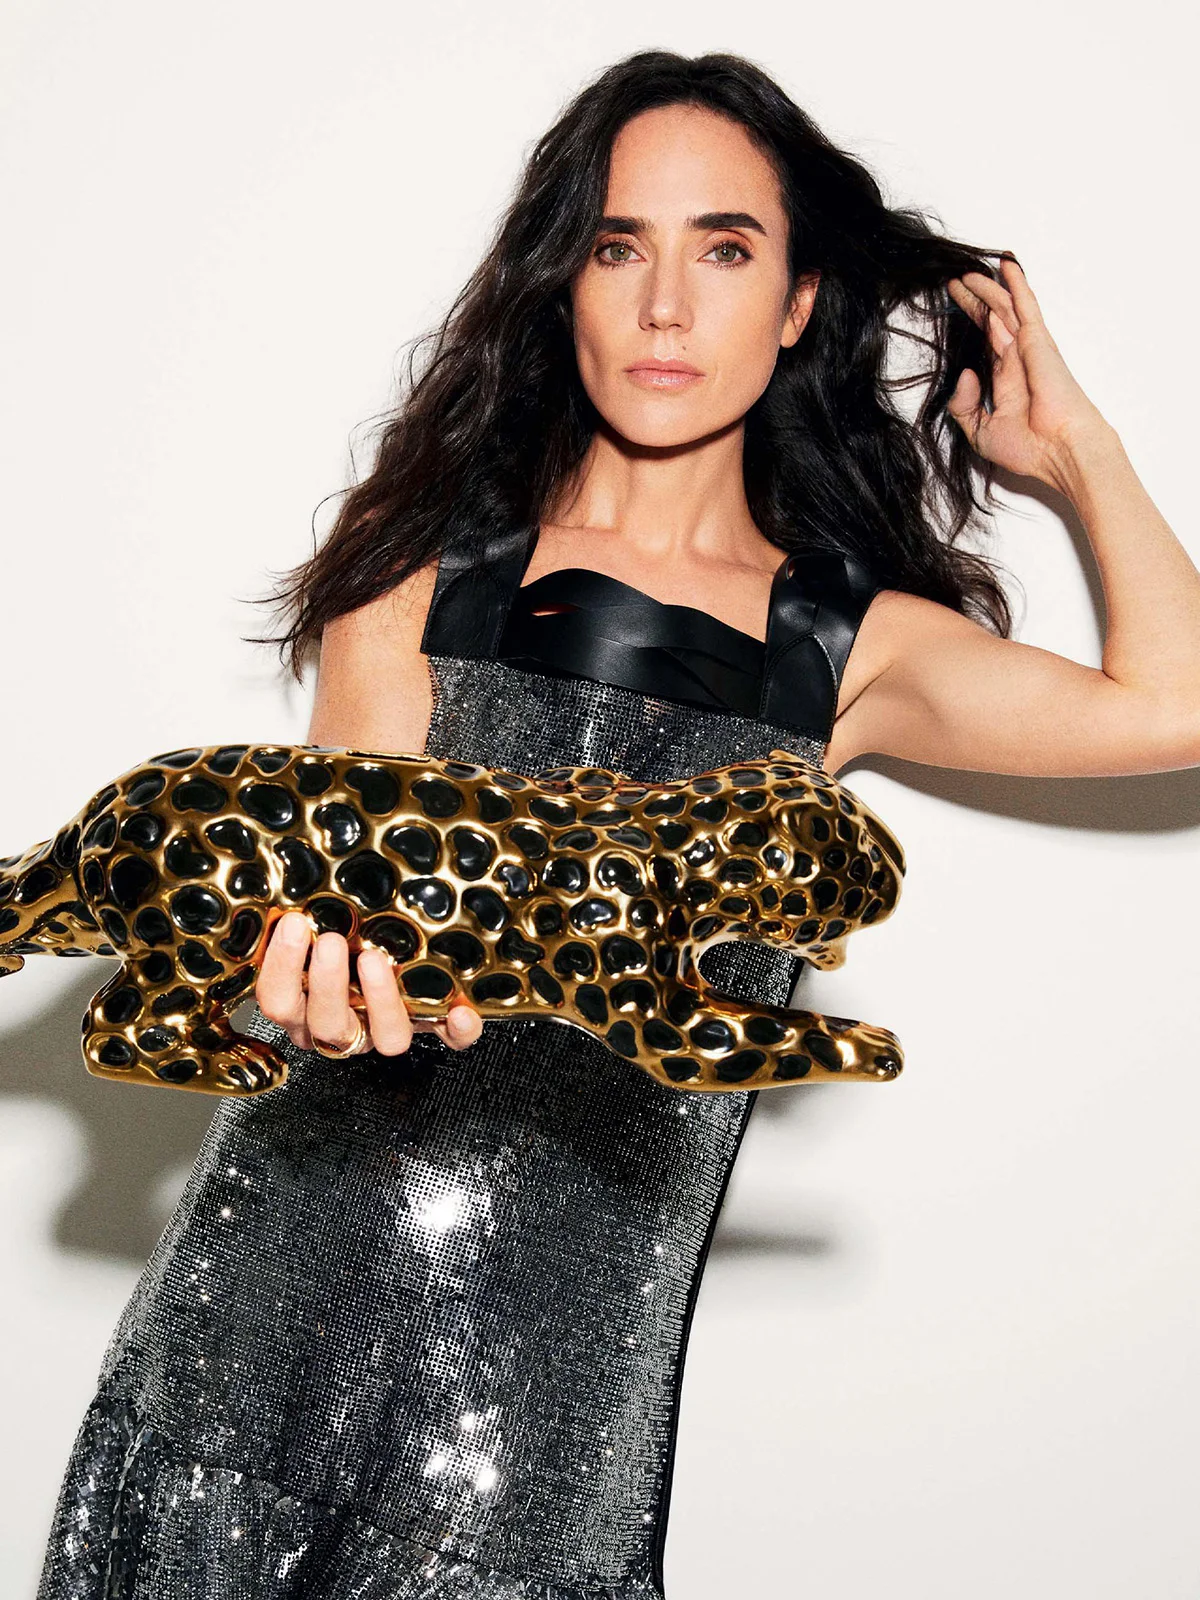 Jennifer Connelly covers The Sunday Times Style May 29th, 2022 by Carin Backoff